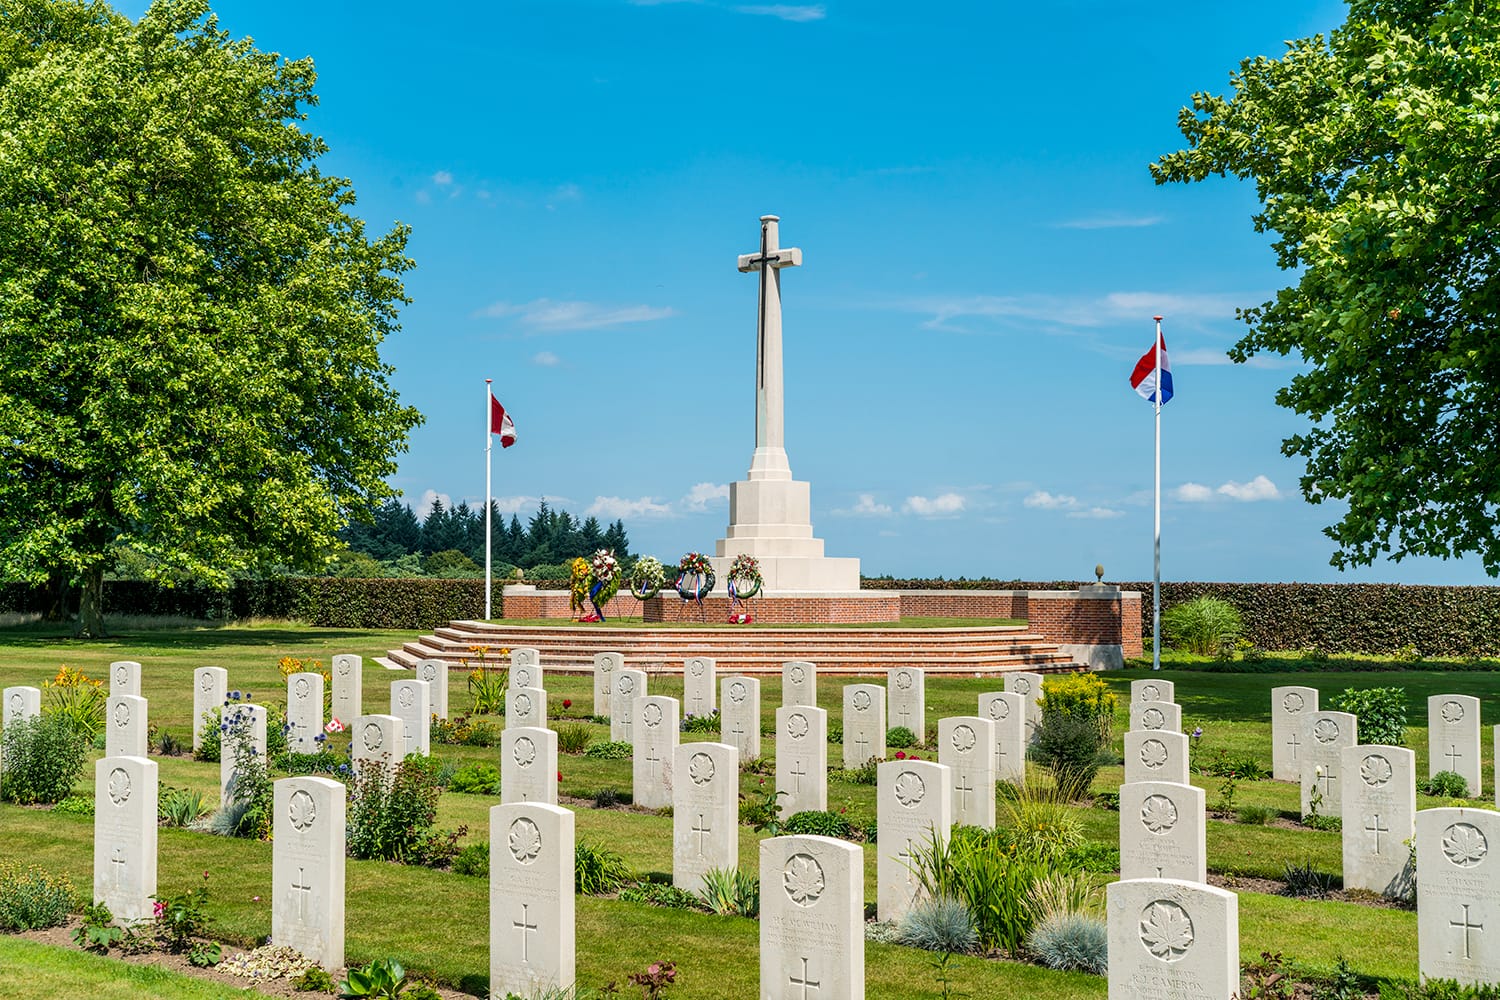 Graves and the monument at the Canadian War Cemetery and Memorial in Groesbeek, Netherlands